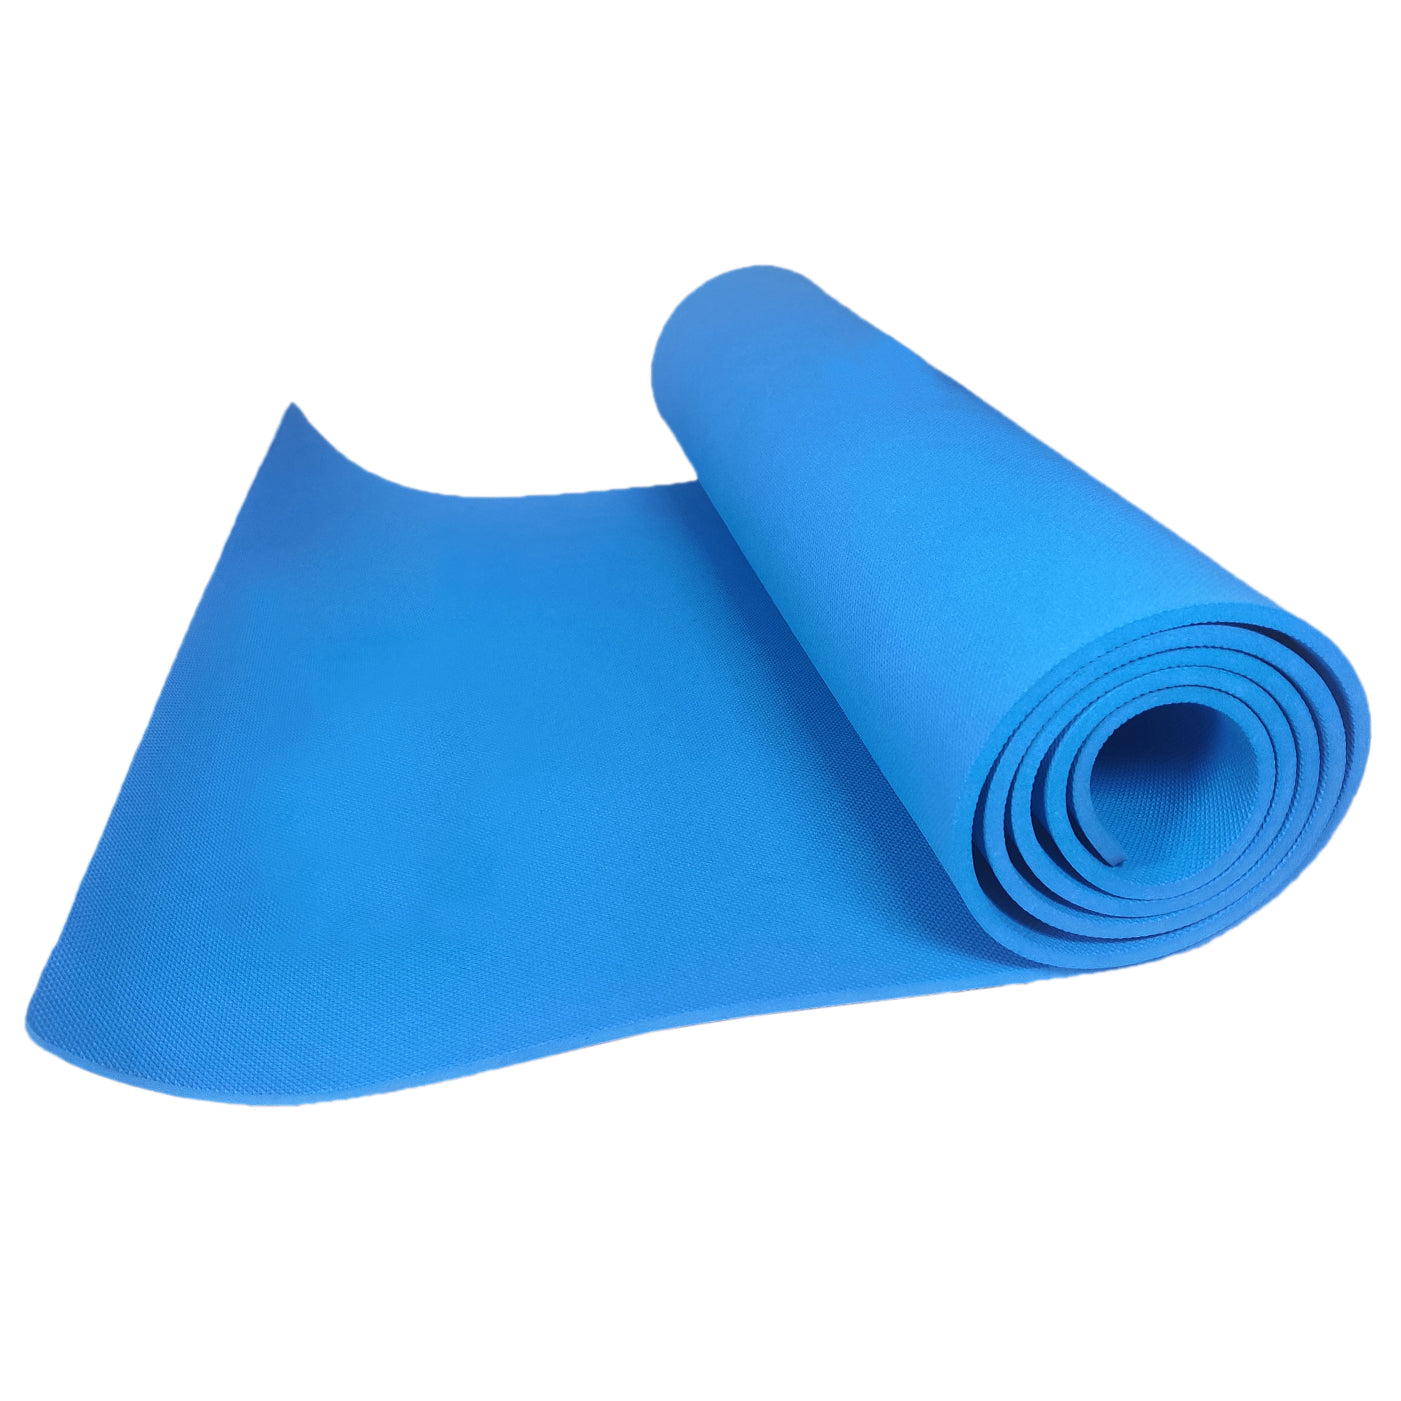 Buy Anti-Skid EVA Classic 4mm Yoga Mat with Strap (Blue) at 47% OFF Online